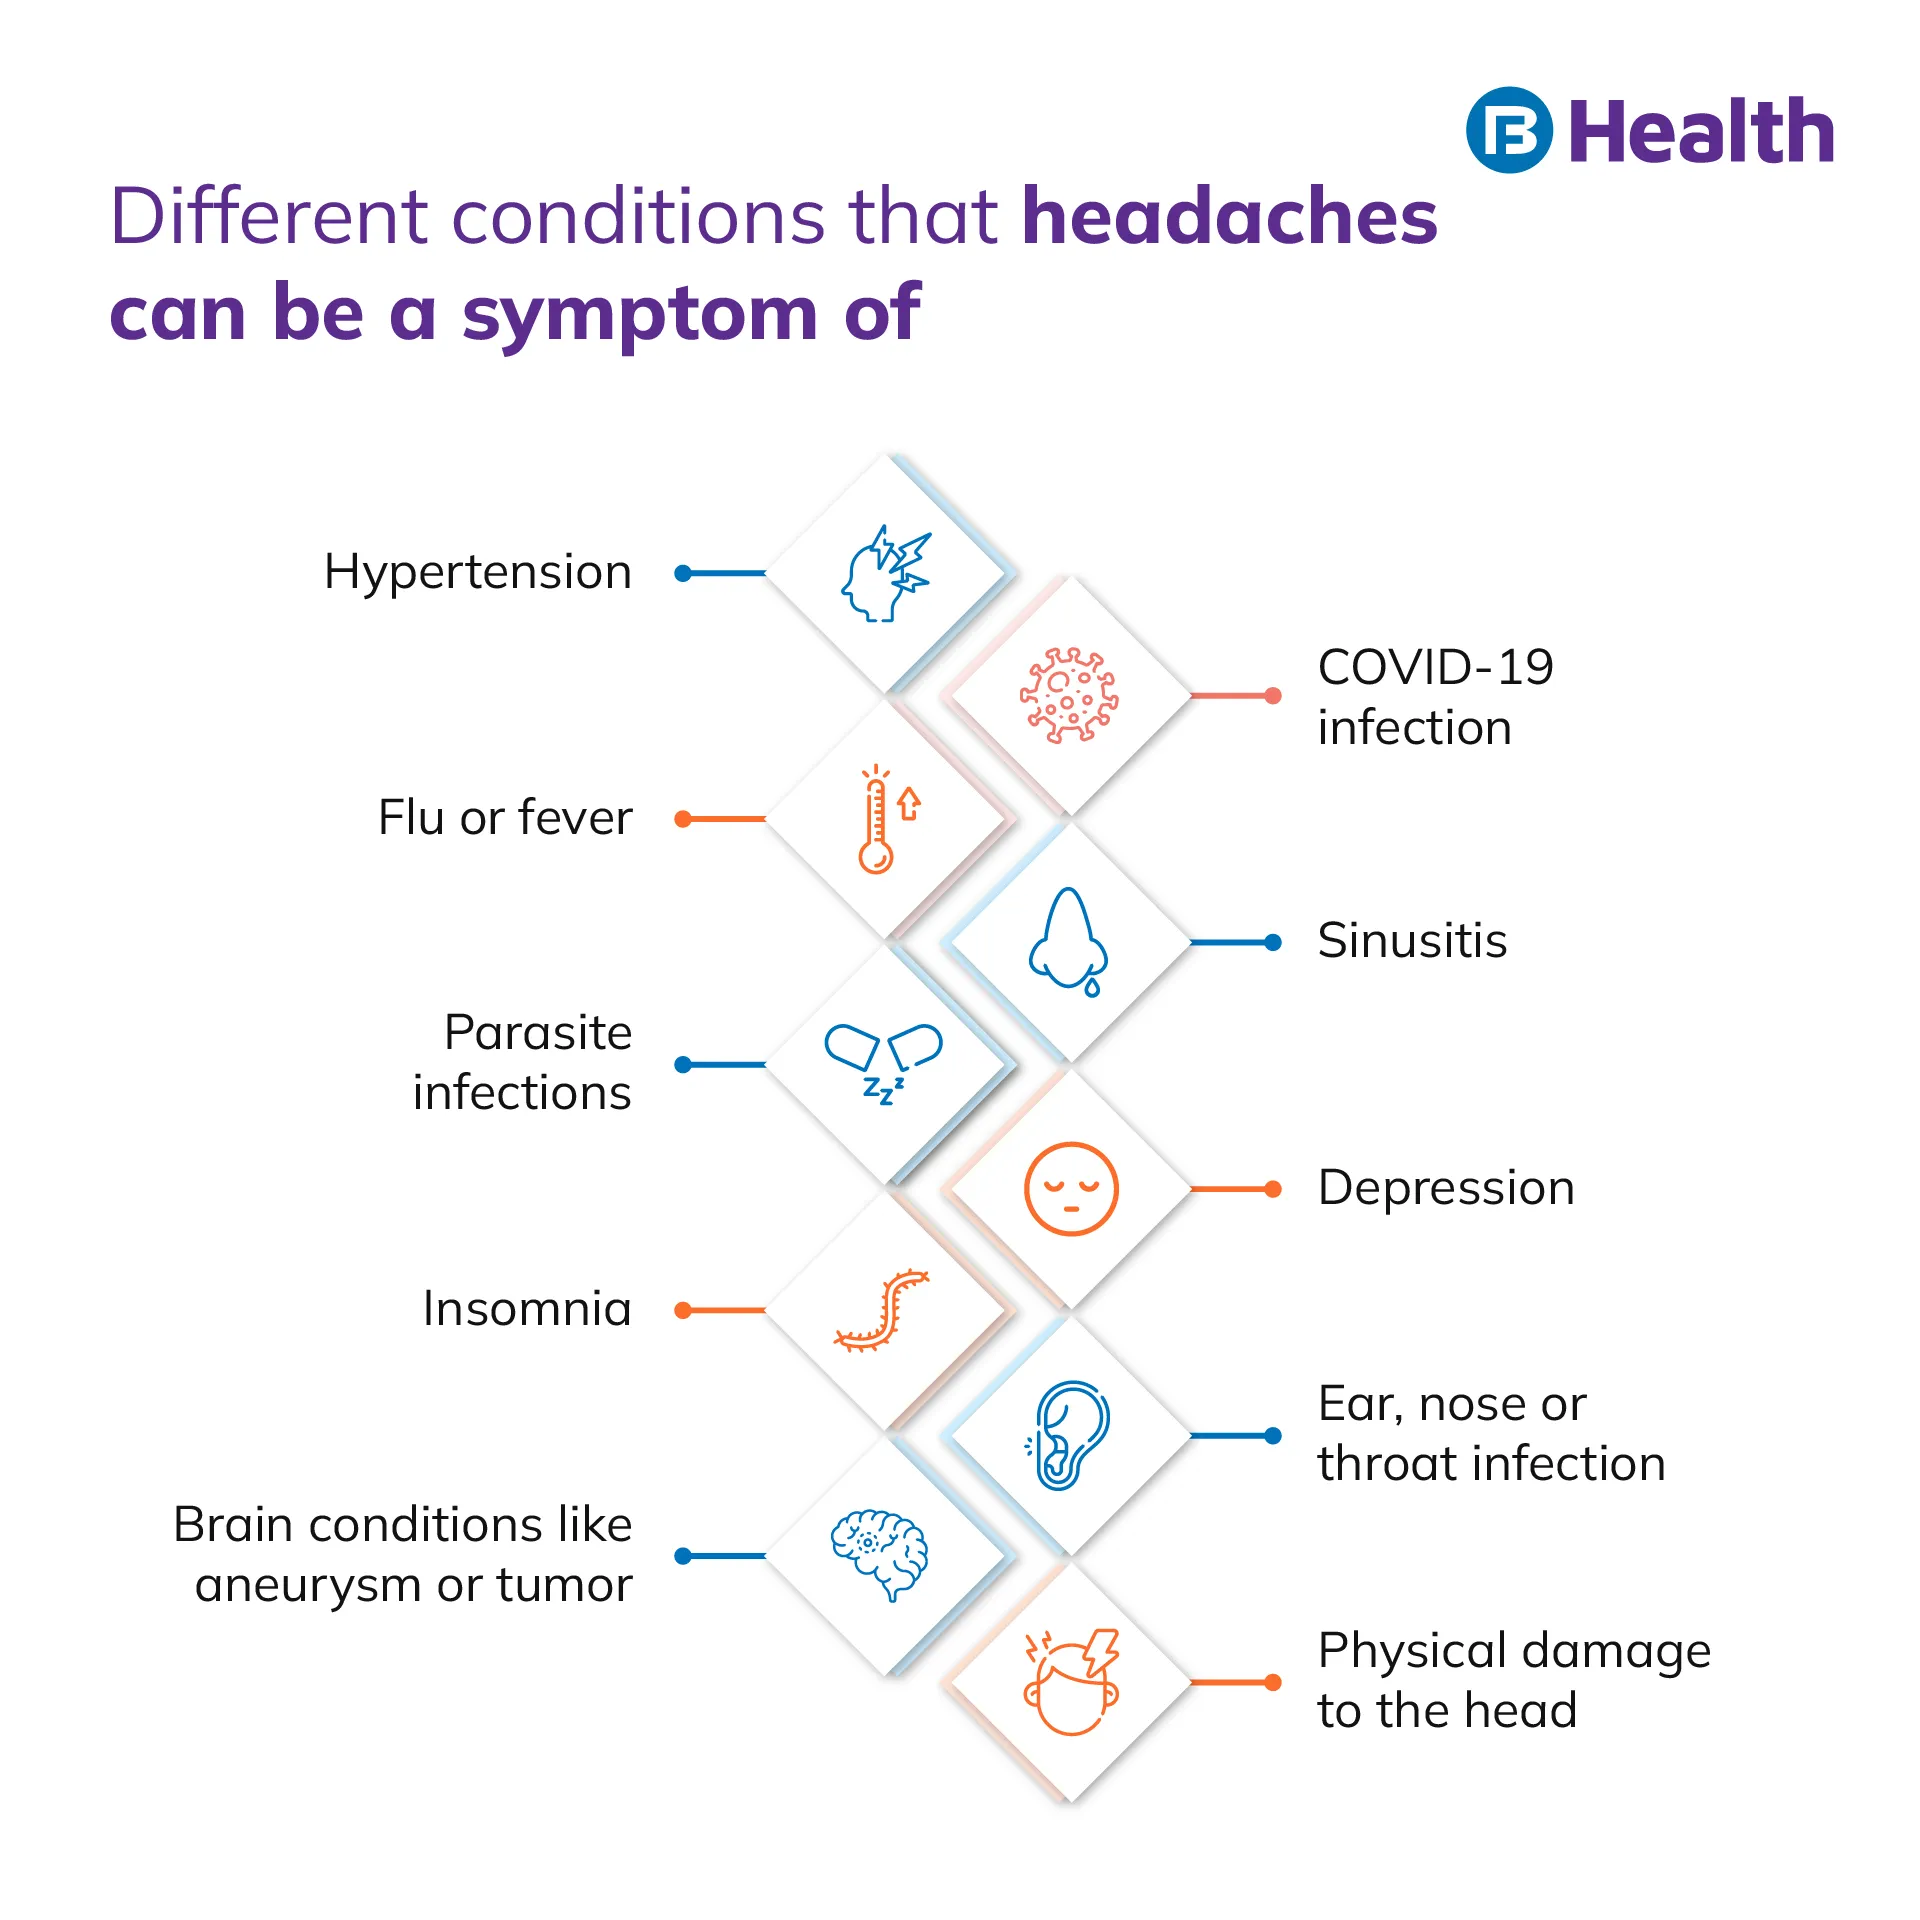 Headache can be trigger to these health conditions